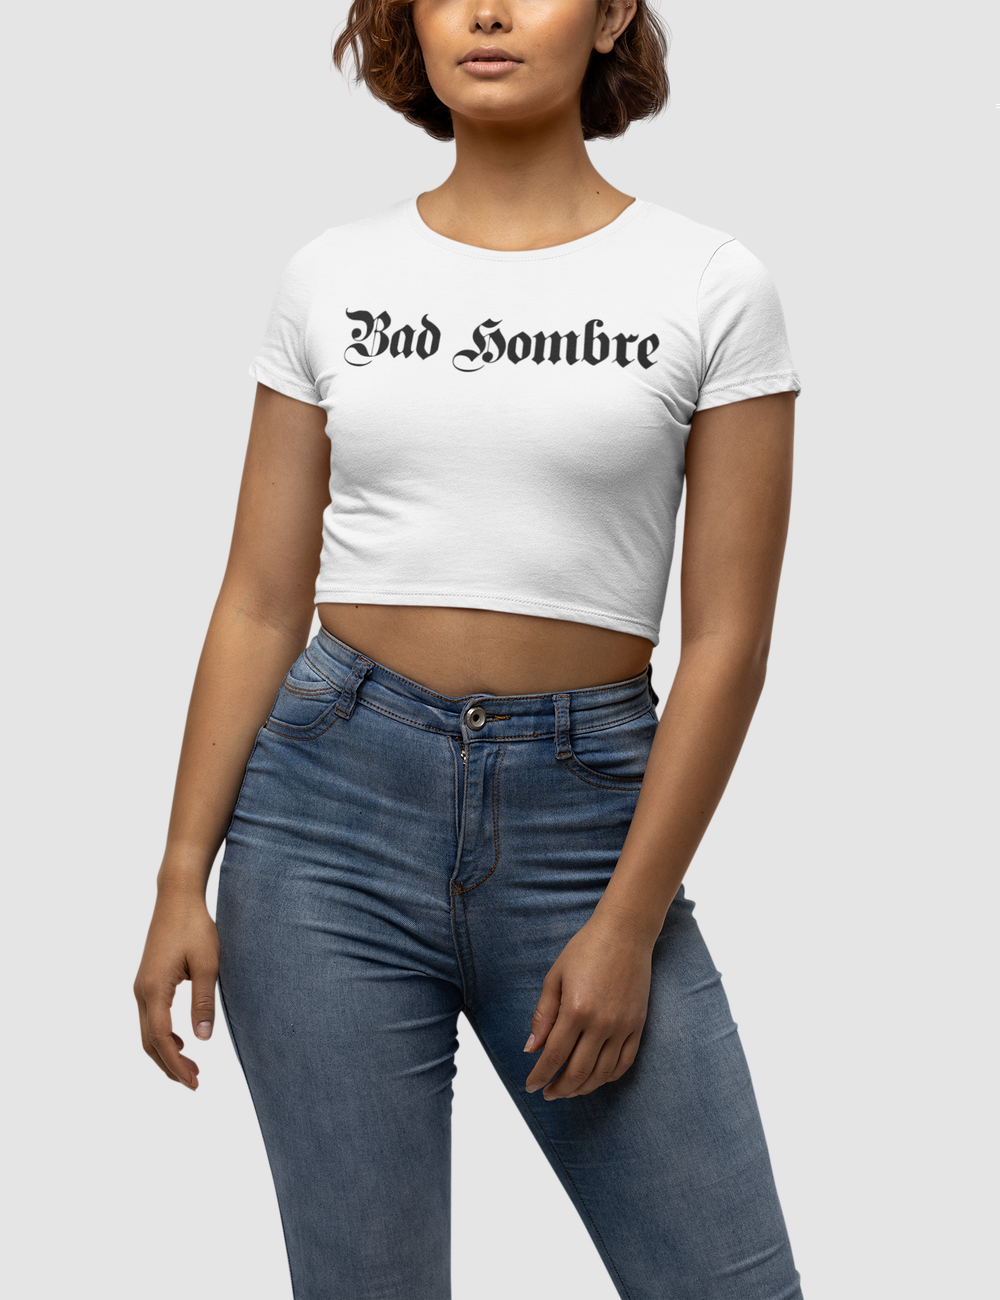 Bad Hombre | Women's Fitted Crop Top T-Shirt OniTakai